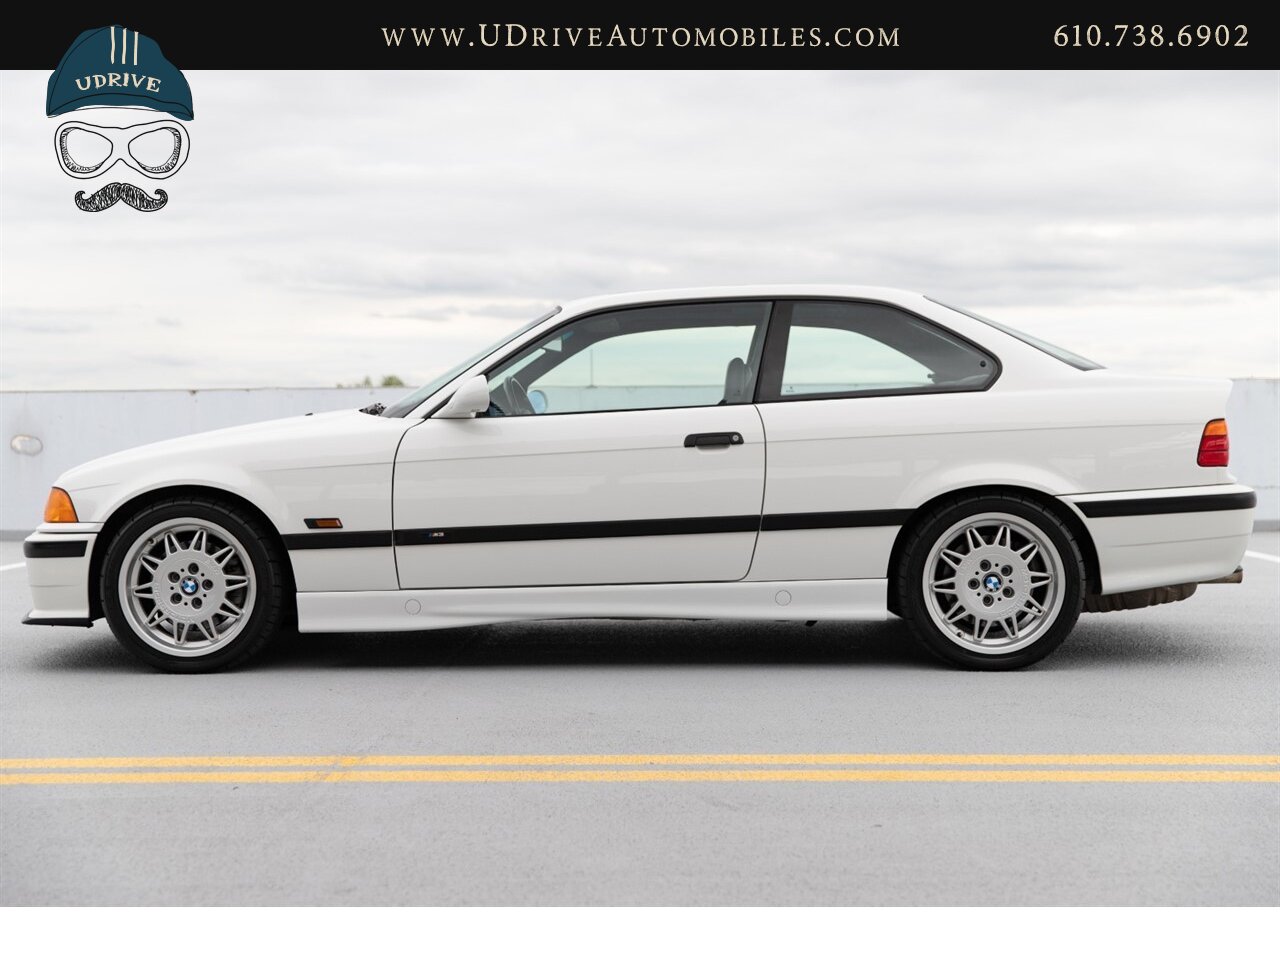 1995 BMW M3 E36 Alpine White over Black Vader Seats  5 Speed - Photo 6 - West Chester, PA 19382